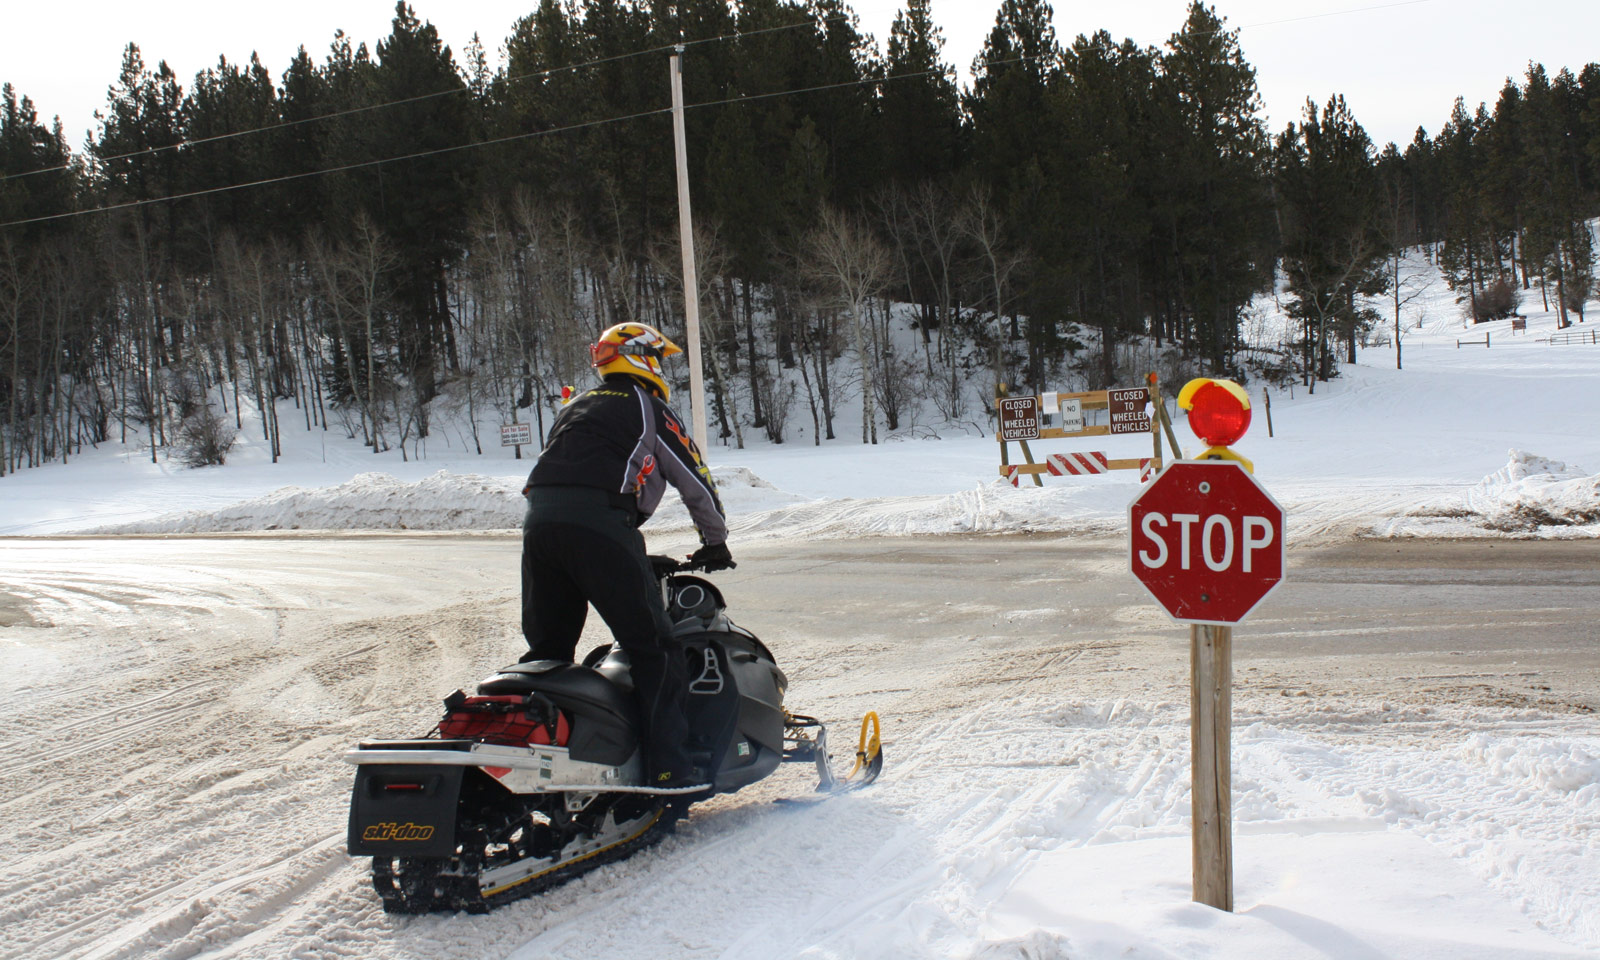 Sledder approaching road intersection